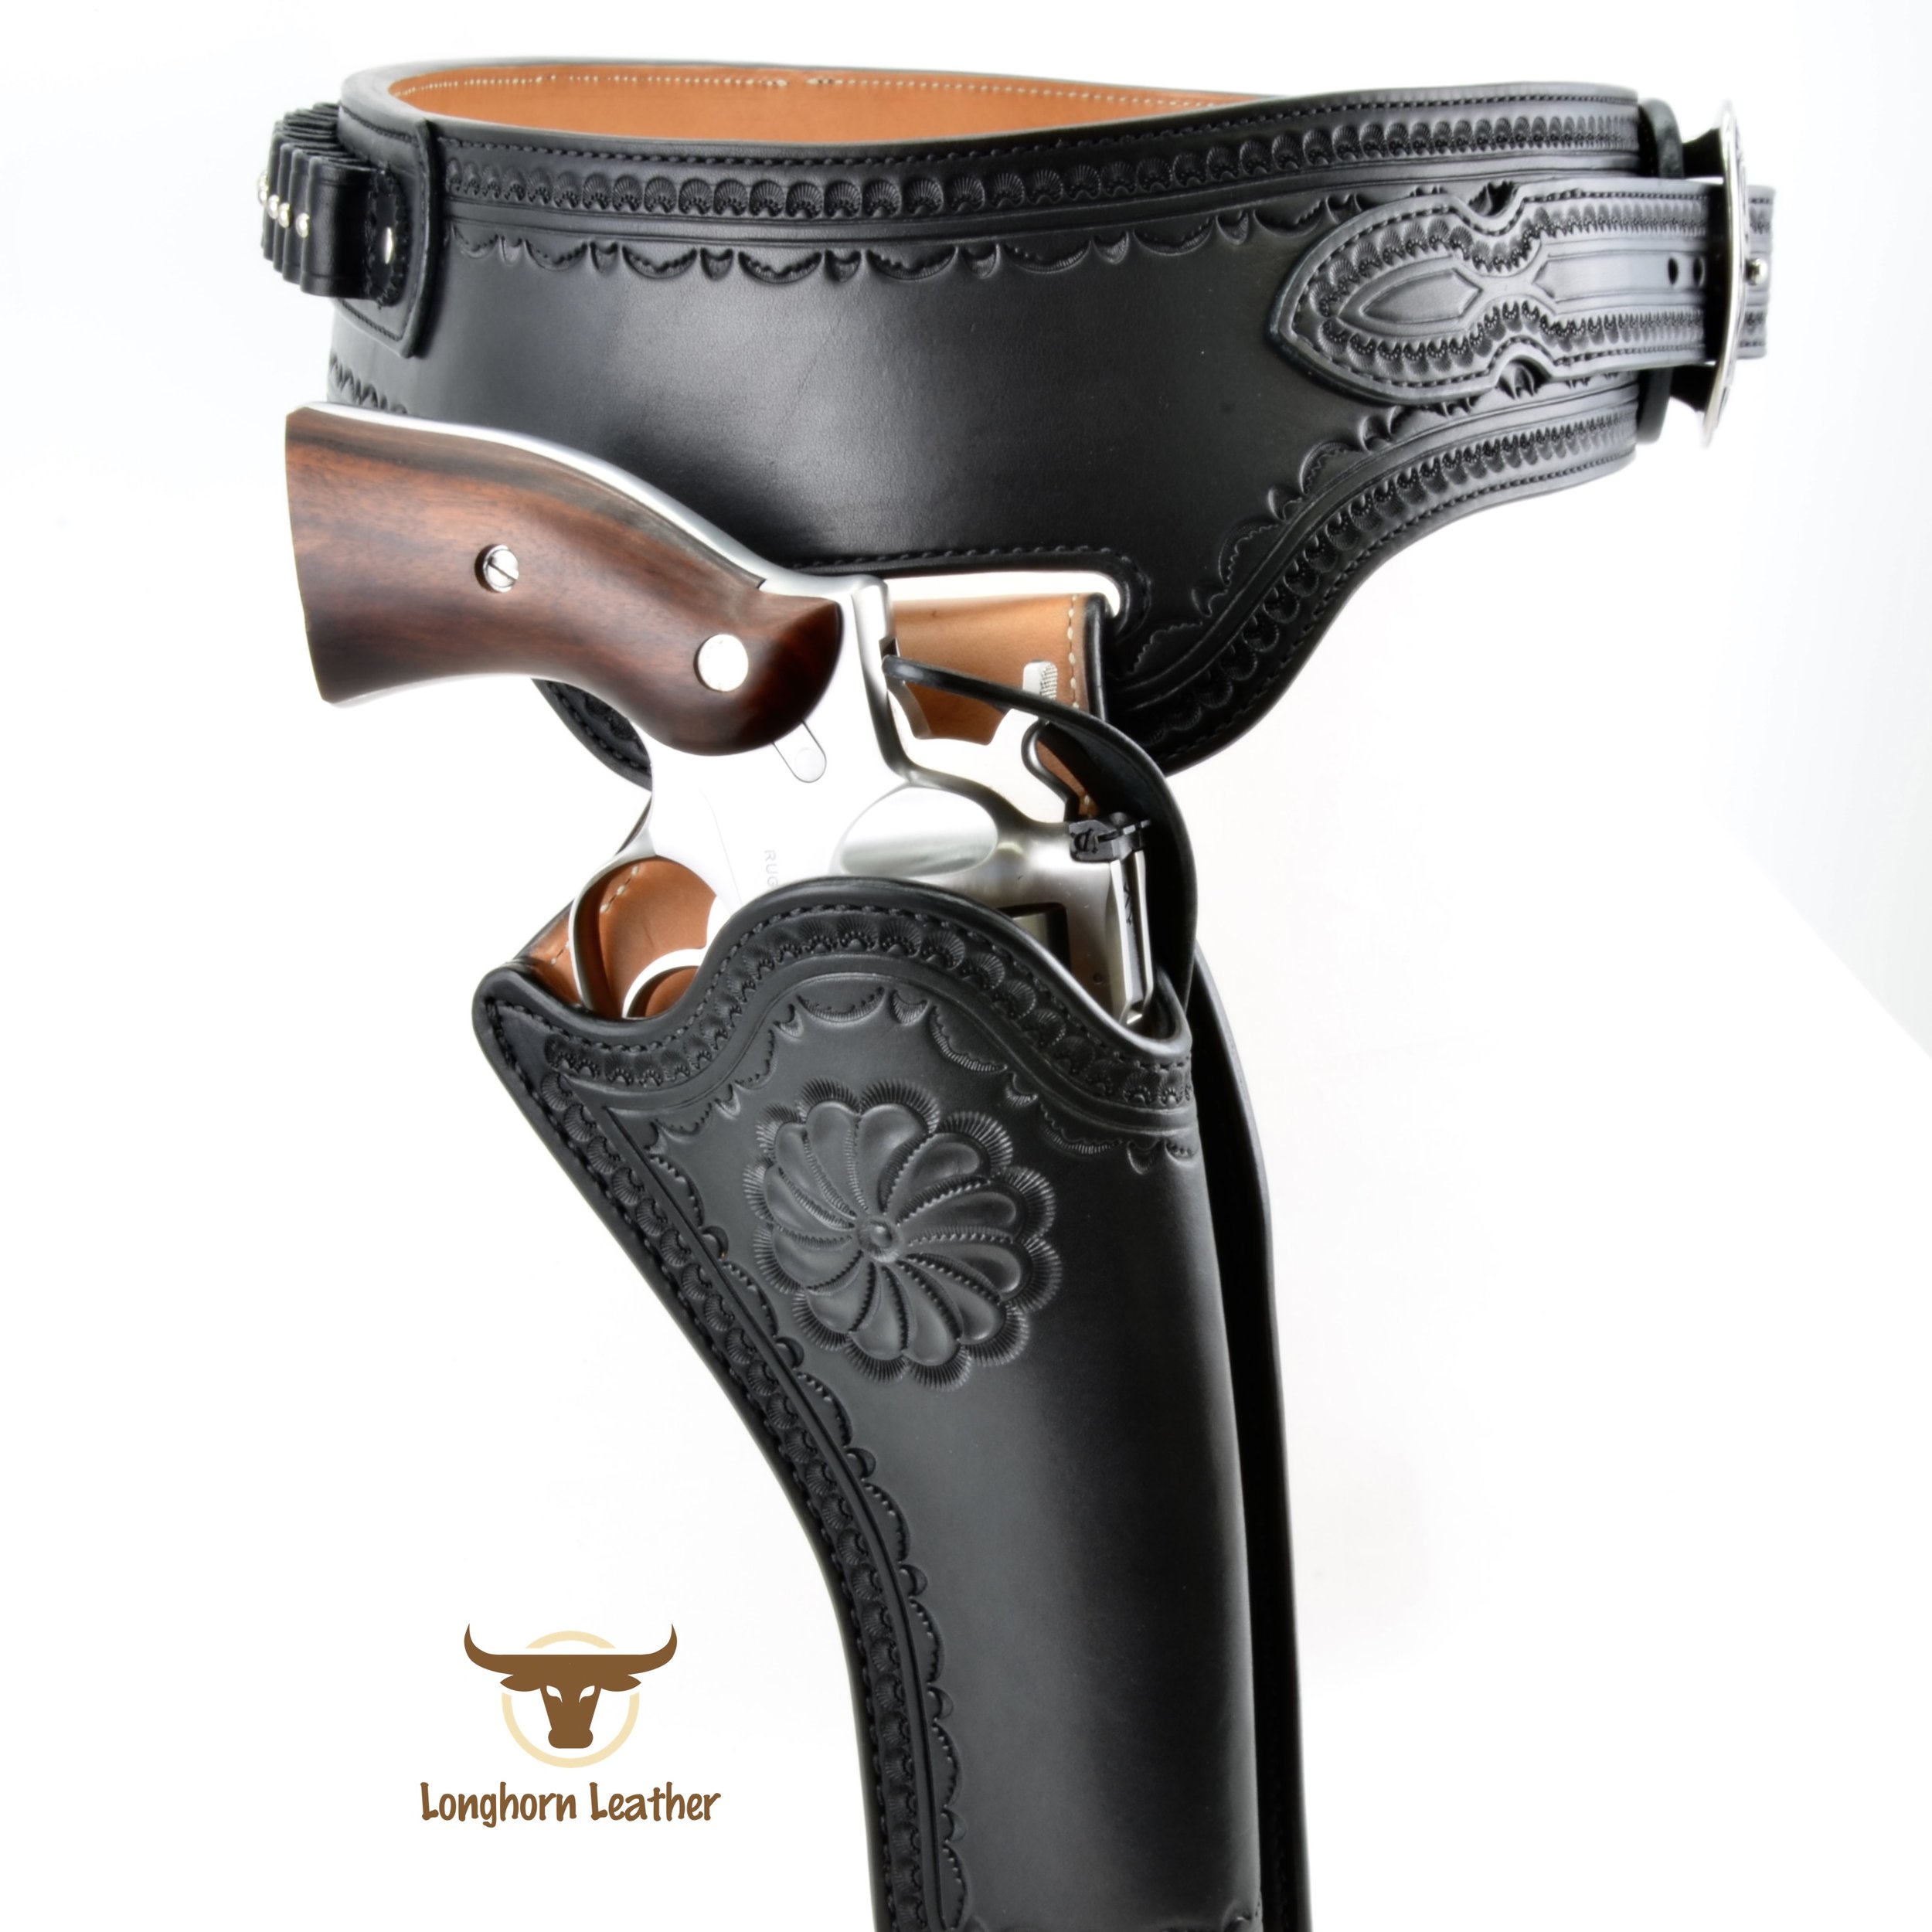 Custom leather single action holster and buscadero belt featuring the “Rio Verde” design.  Individually handcrafted at Longhorn Leather AZ